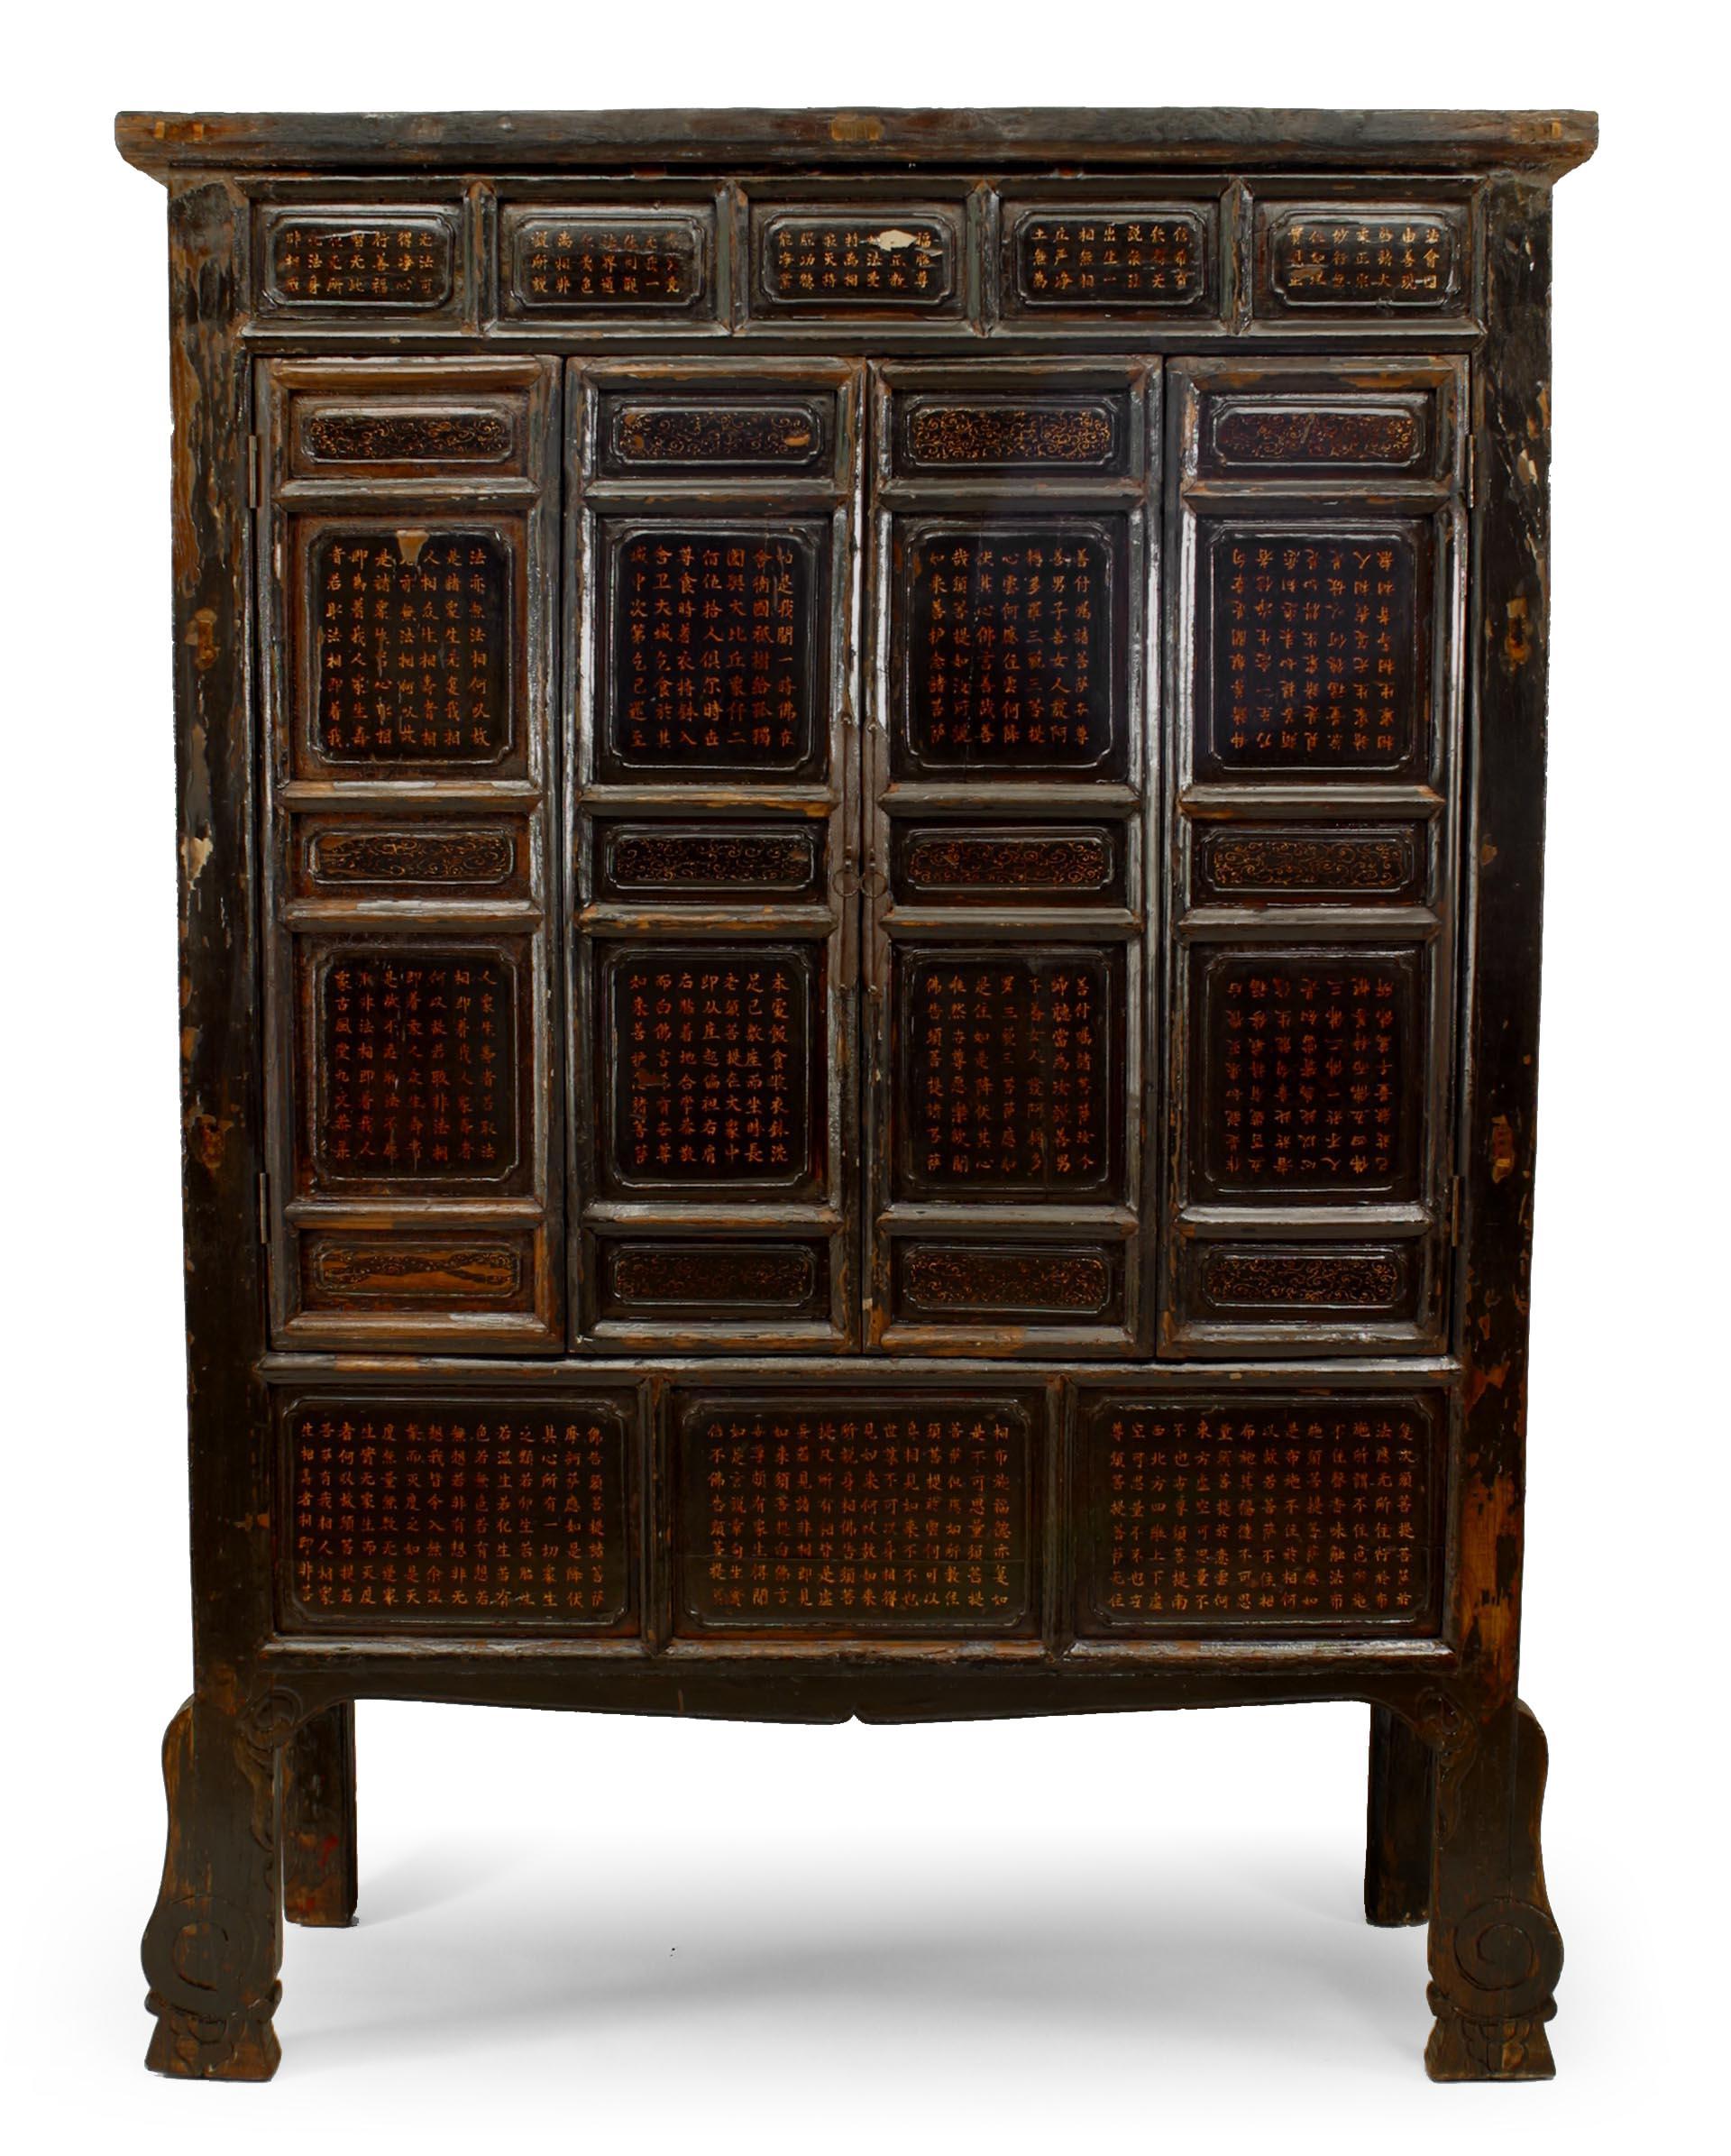 Asian Chinese black lacquered over elm cabinet with two fold-back doors with Chinese character decoration covering front.